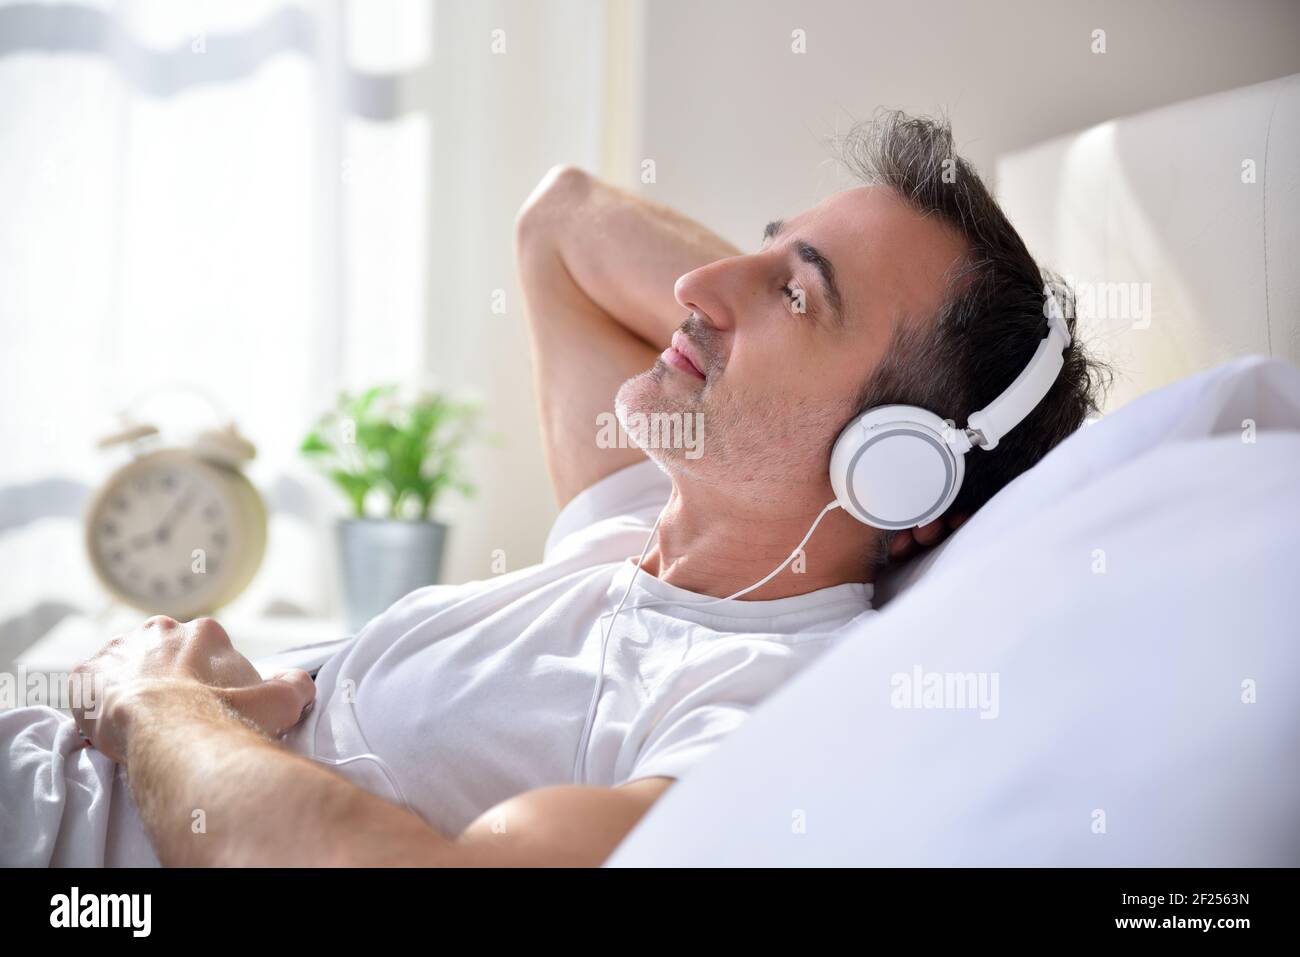 Happy and relaxed adult man with closed eyes listening to music lying in bed with window in the background entering the morning light. Stock Photo